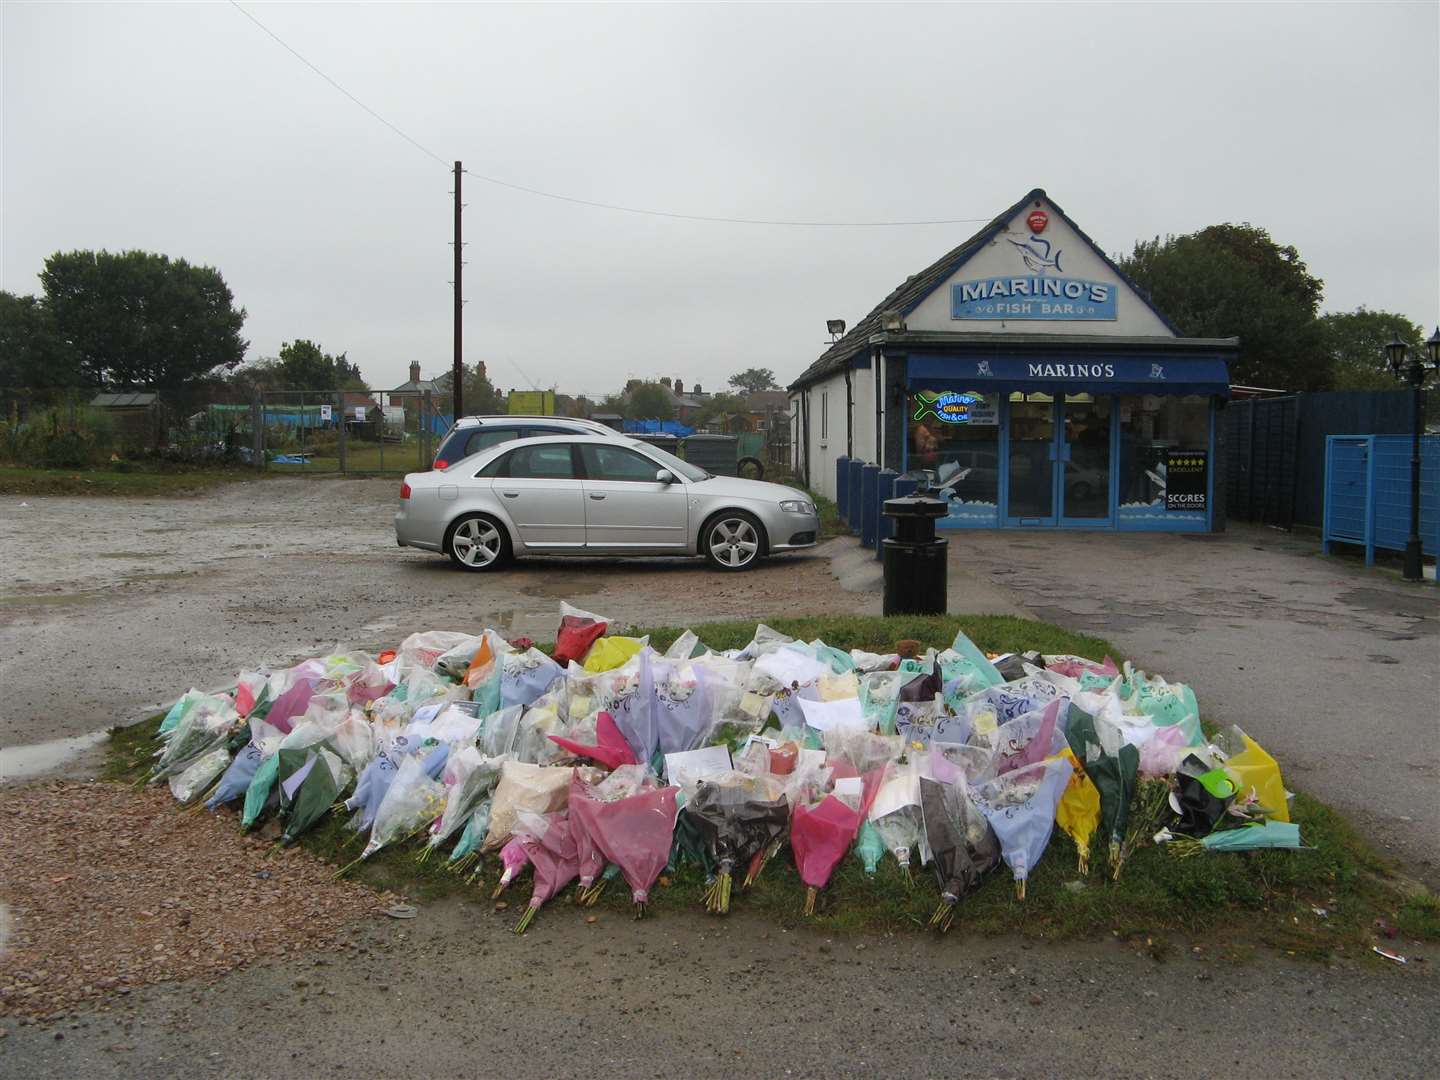 Floral tributes left at the scene of the accident in 2009